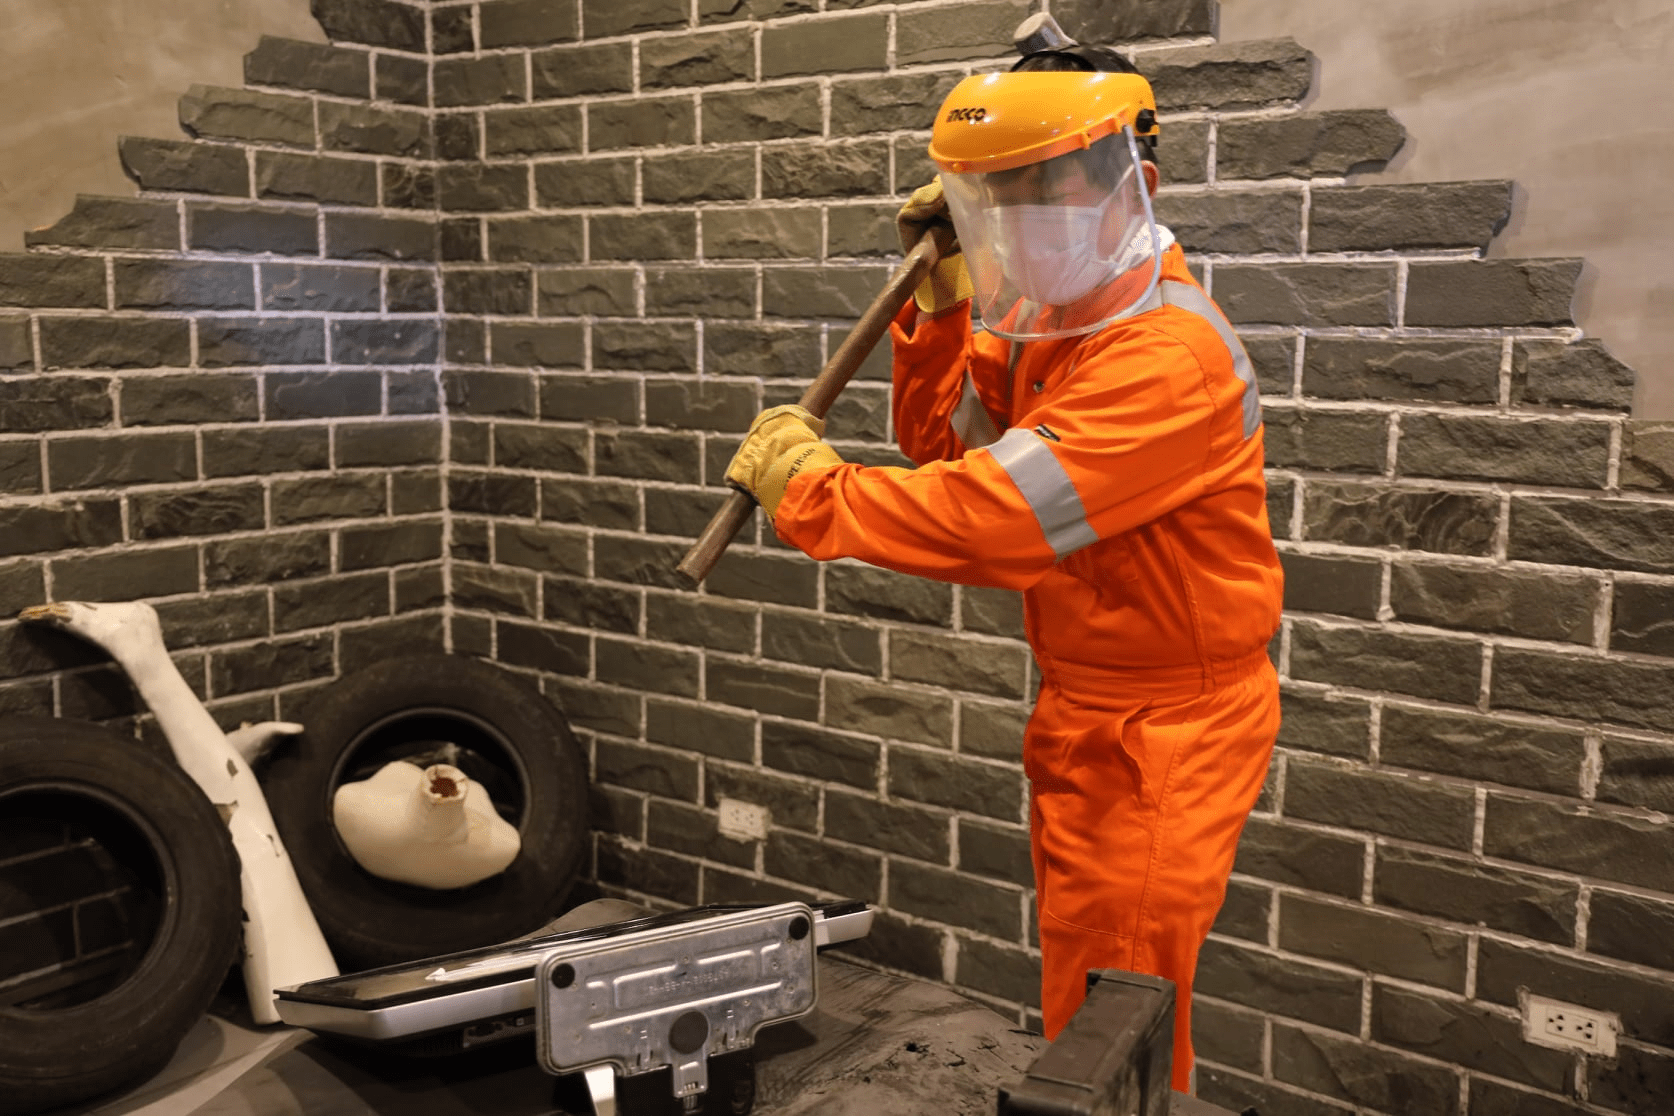 Rage room in Thailand